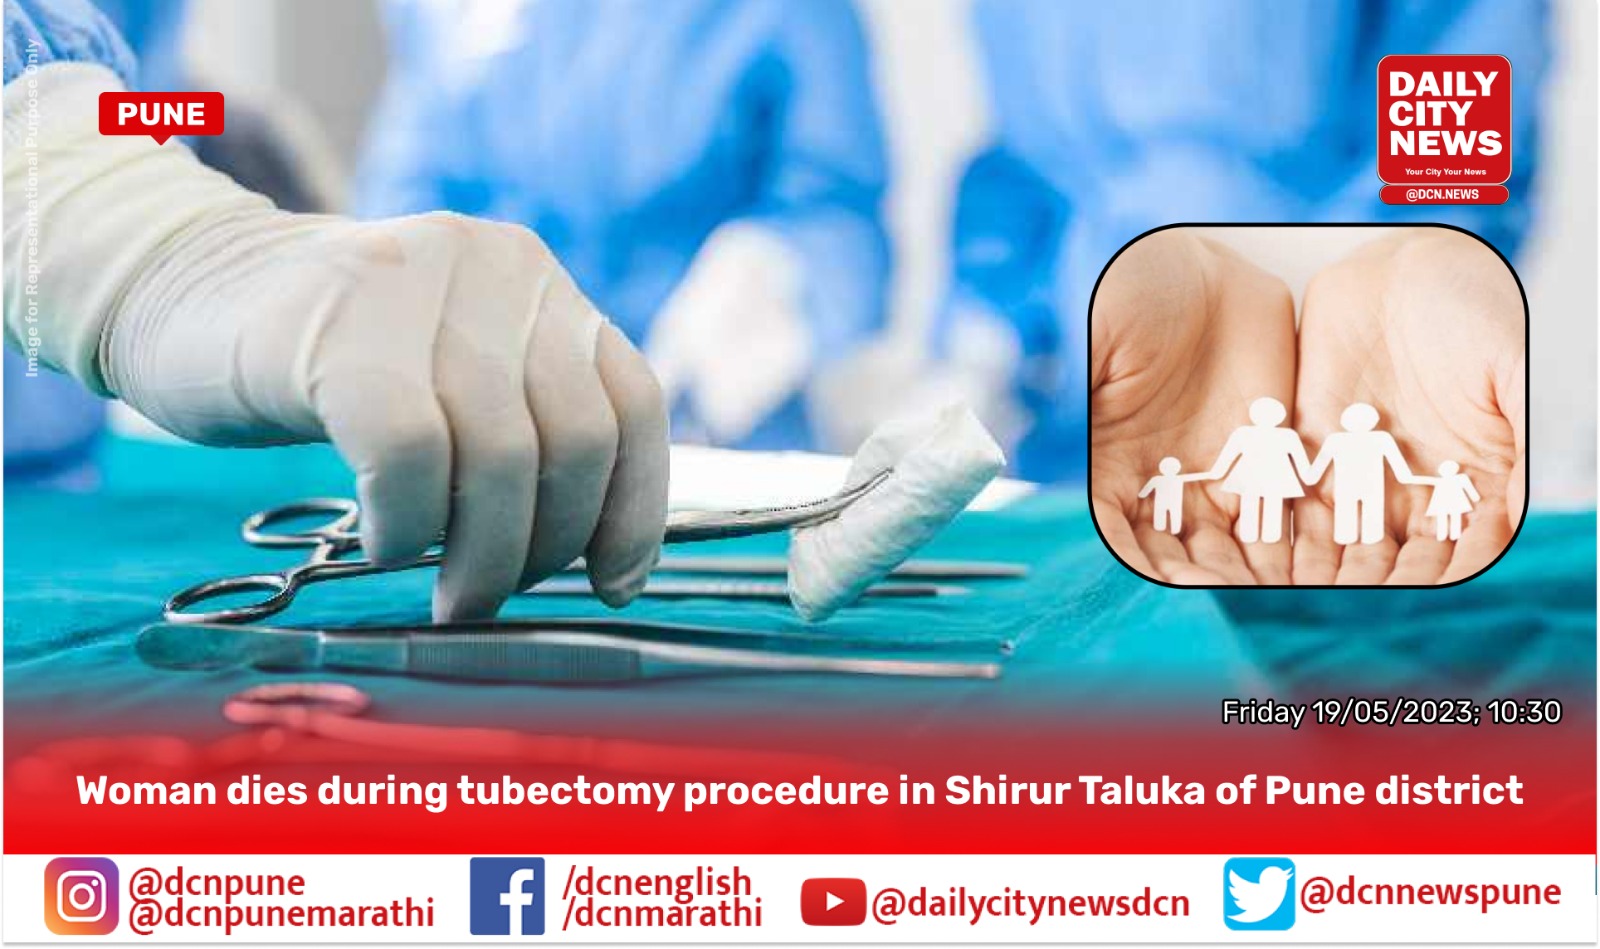 Woman dies during tubectomy procedure in Shirur Taluka of Pune district